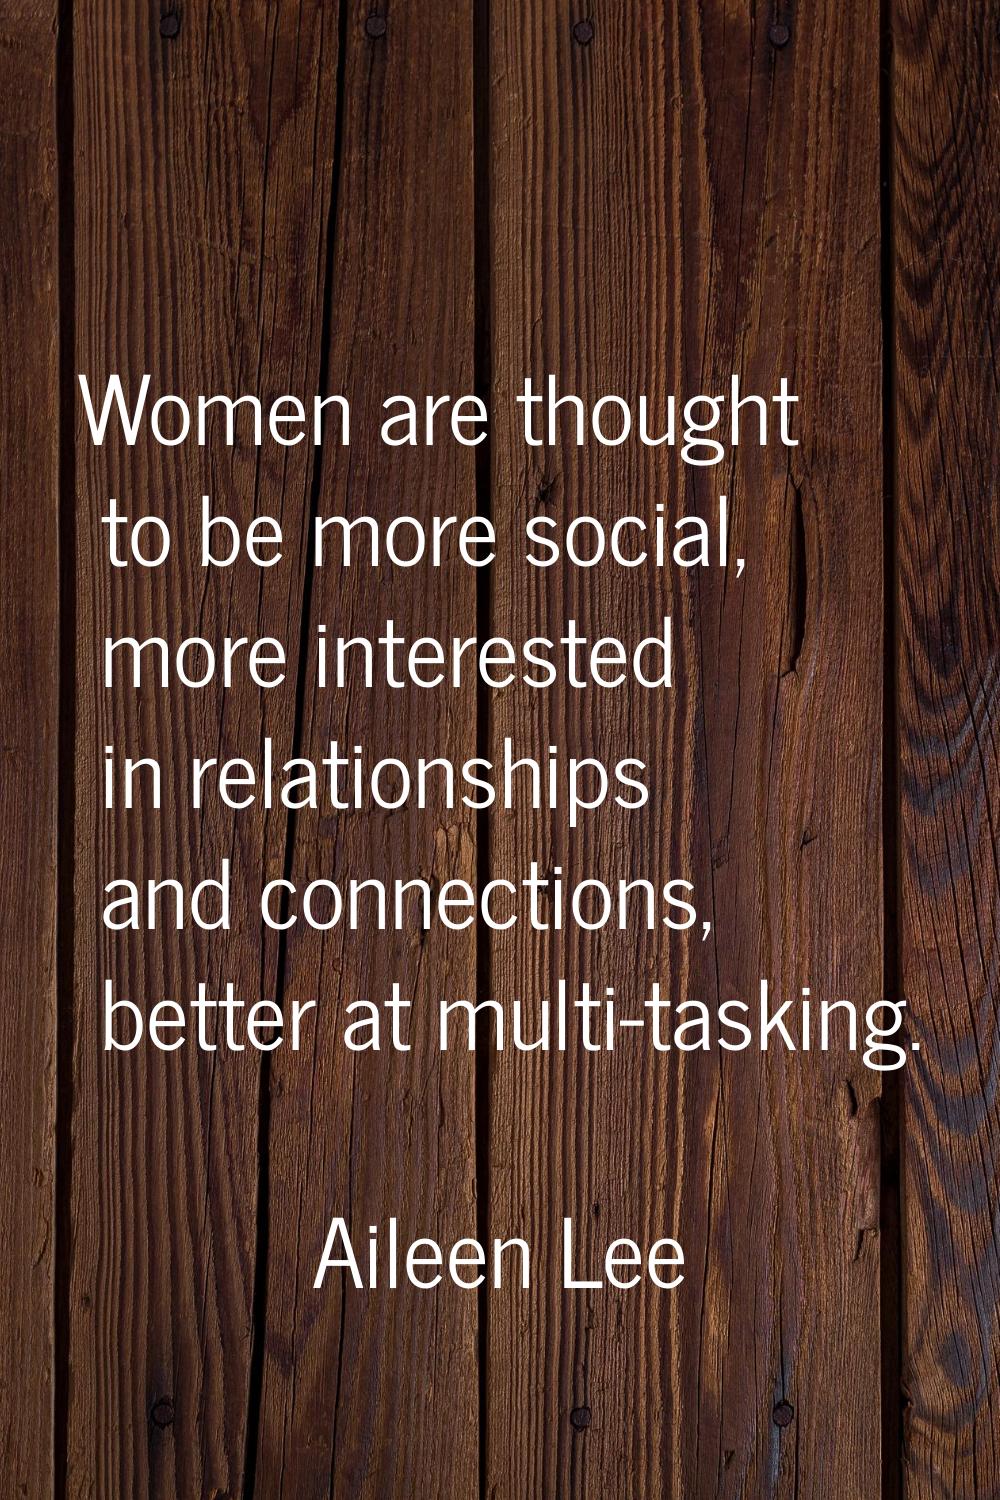 Women are thought to be more social, more interested in relationships and connections, better at mu